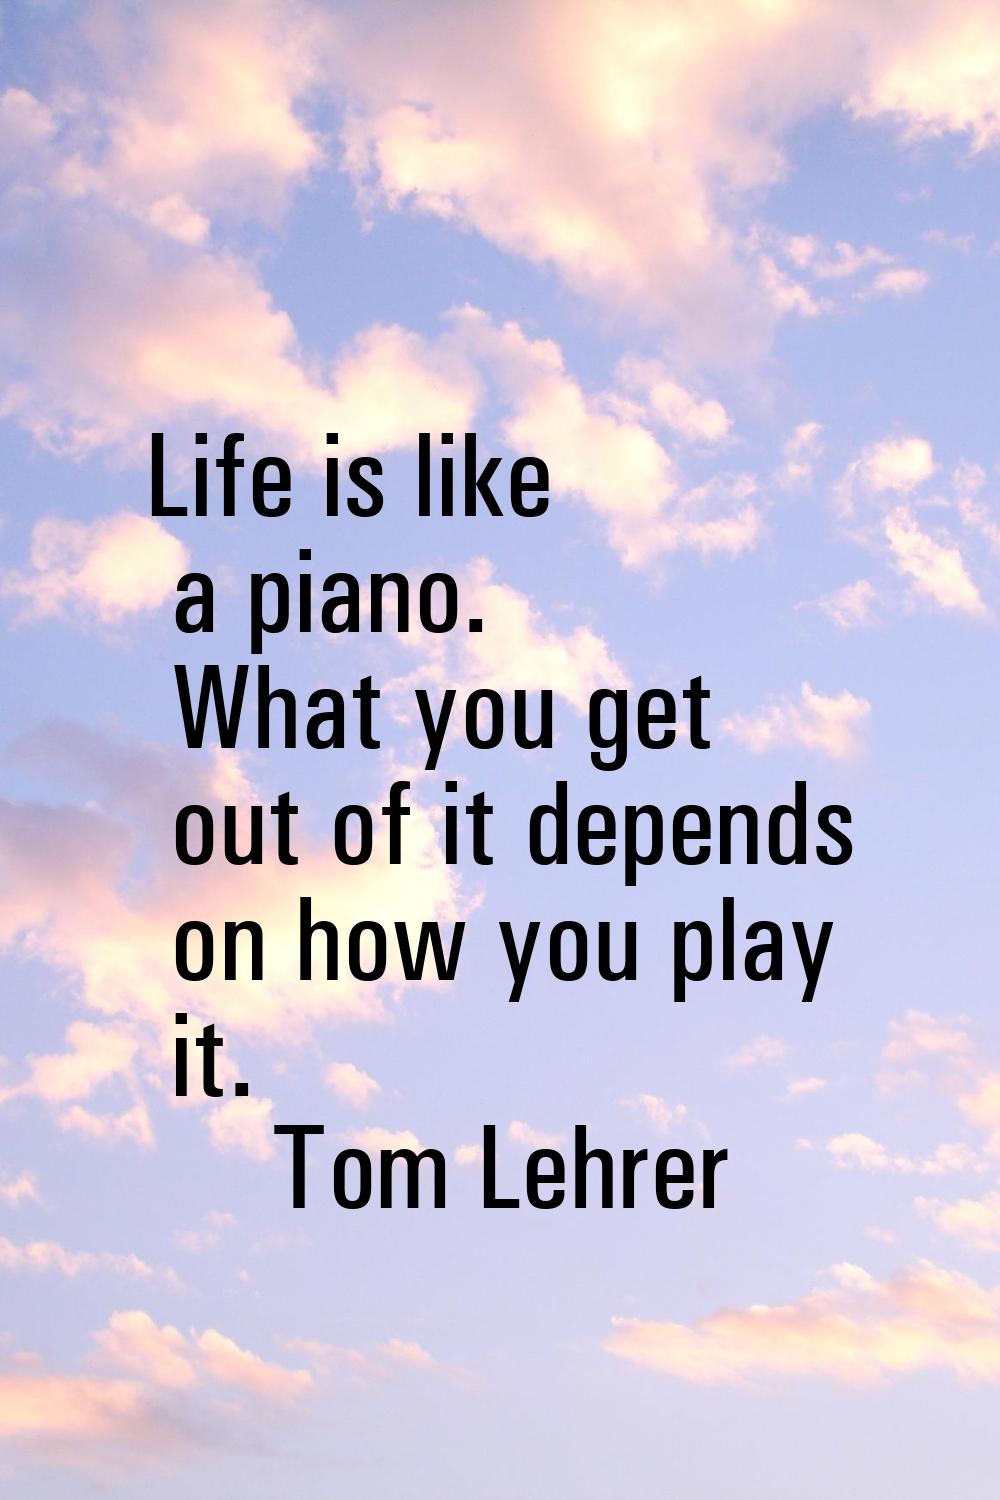 Life is like a piano. What you get out of it depends on how you play it.